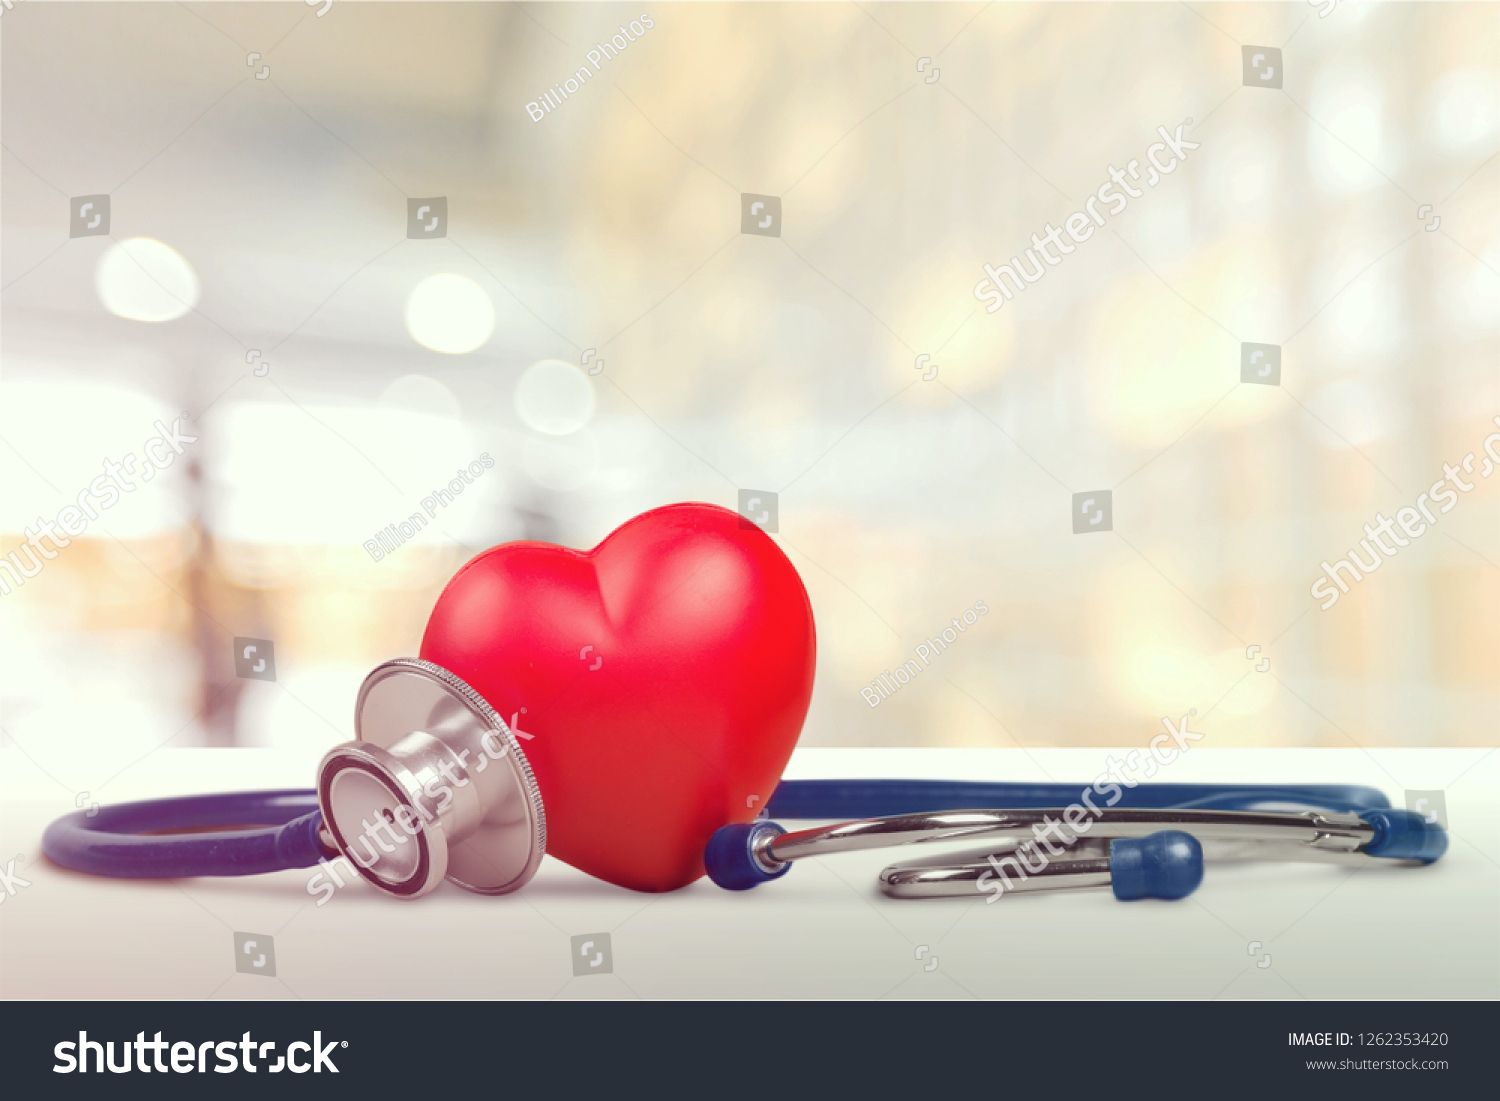 One single alone red heart love shape hand exercise ball with bandage MD medical doctor physician's stethoscope white wood background: Hospital life insurance concept: World heart health day idea #1262353420